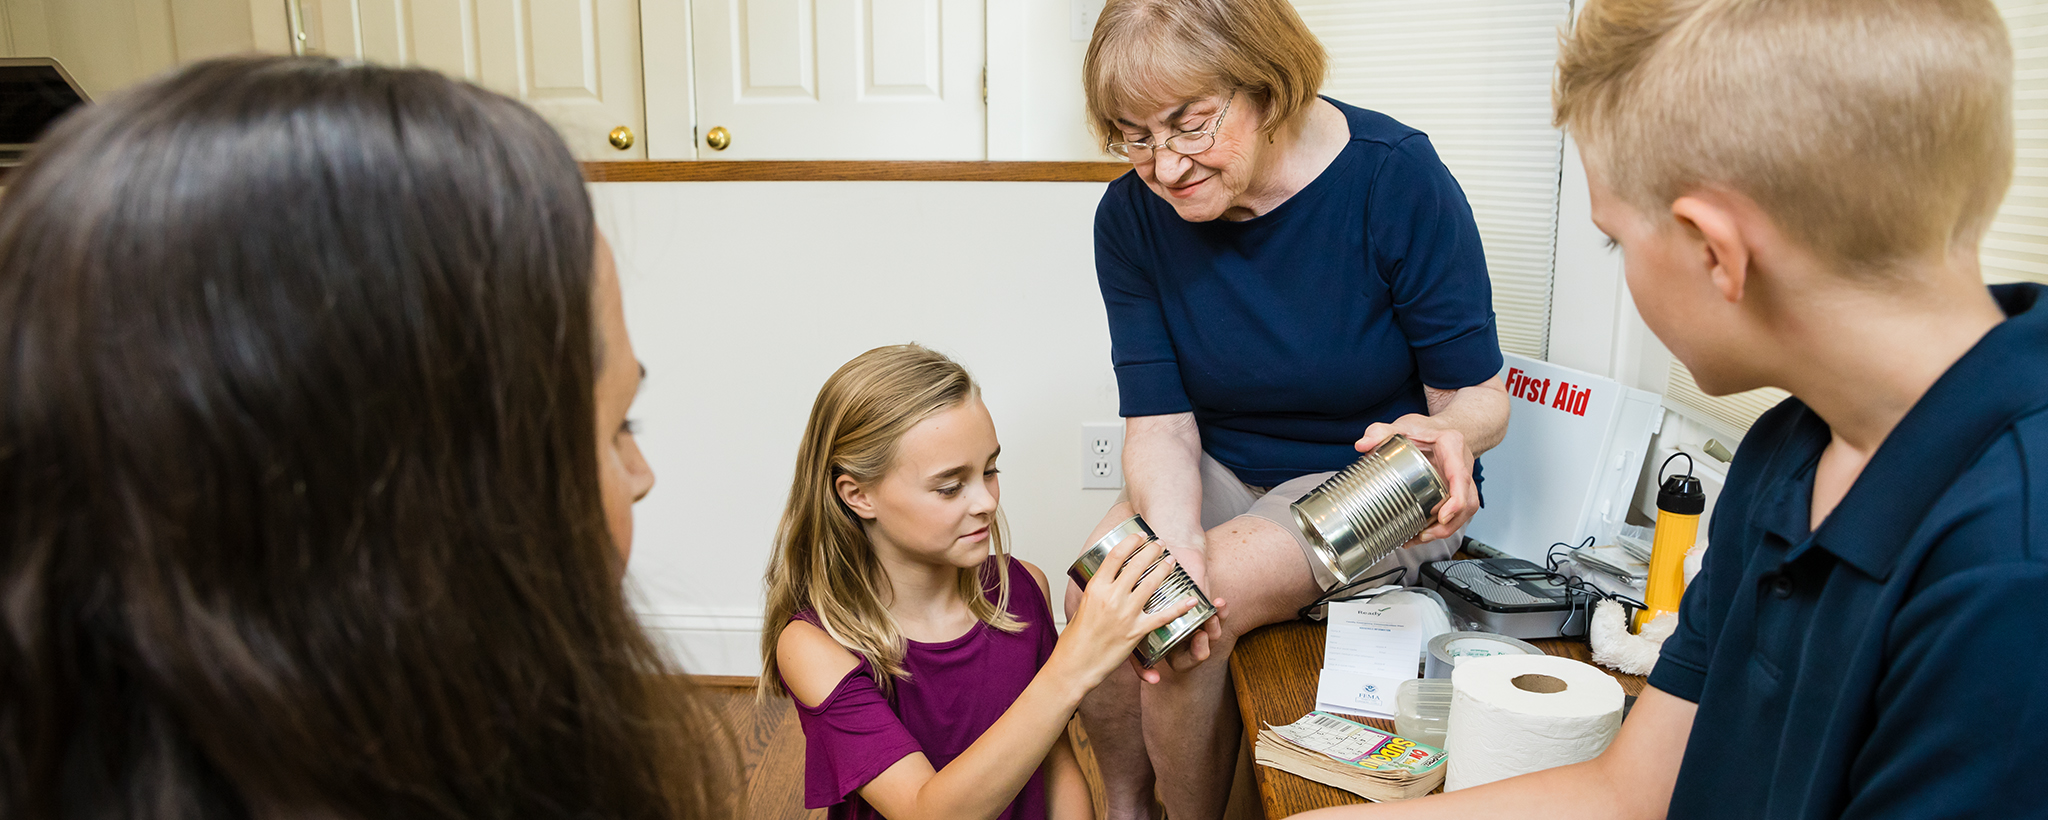 A grandmother builds hands her granddaughter cans for an emergency supply kit.